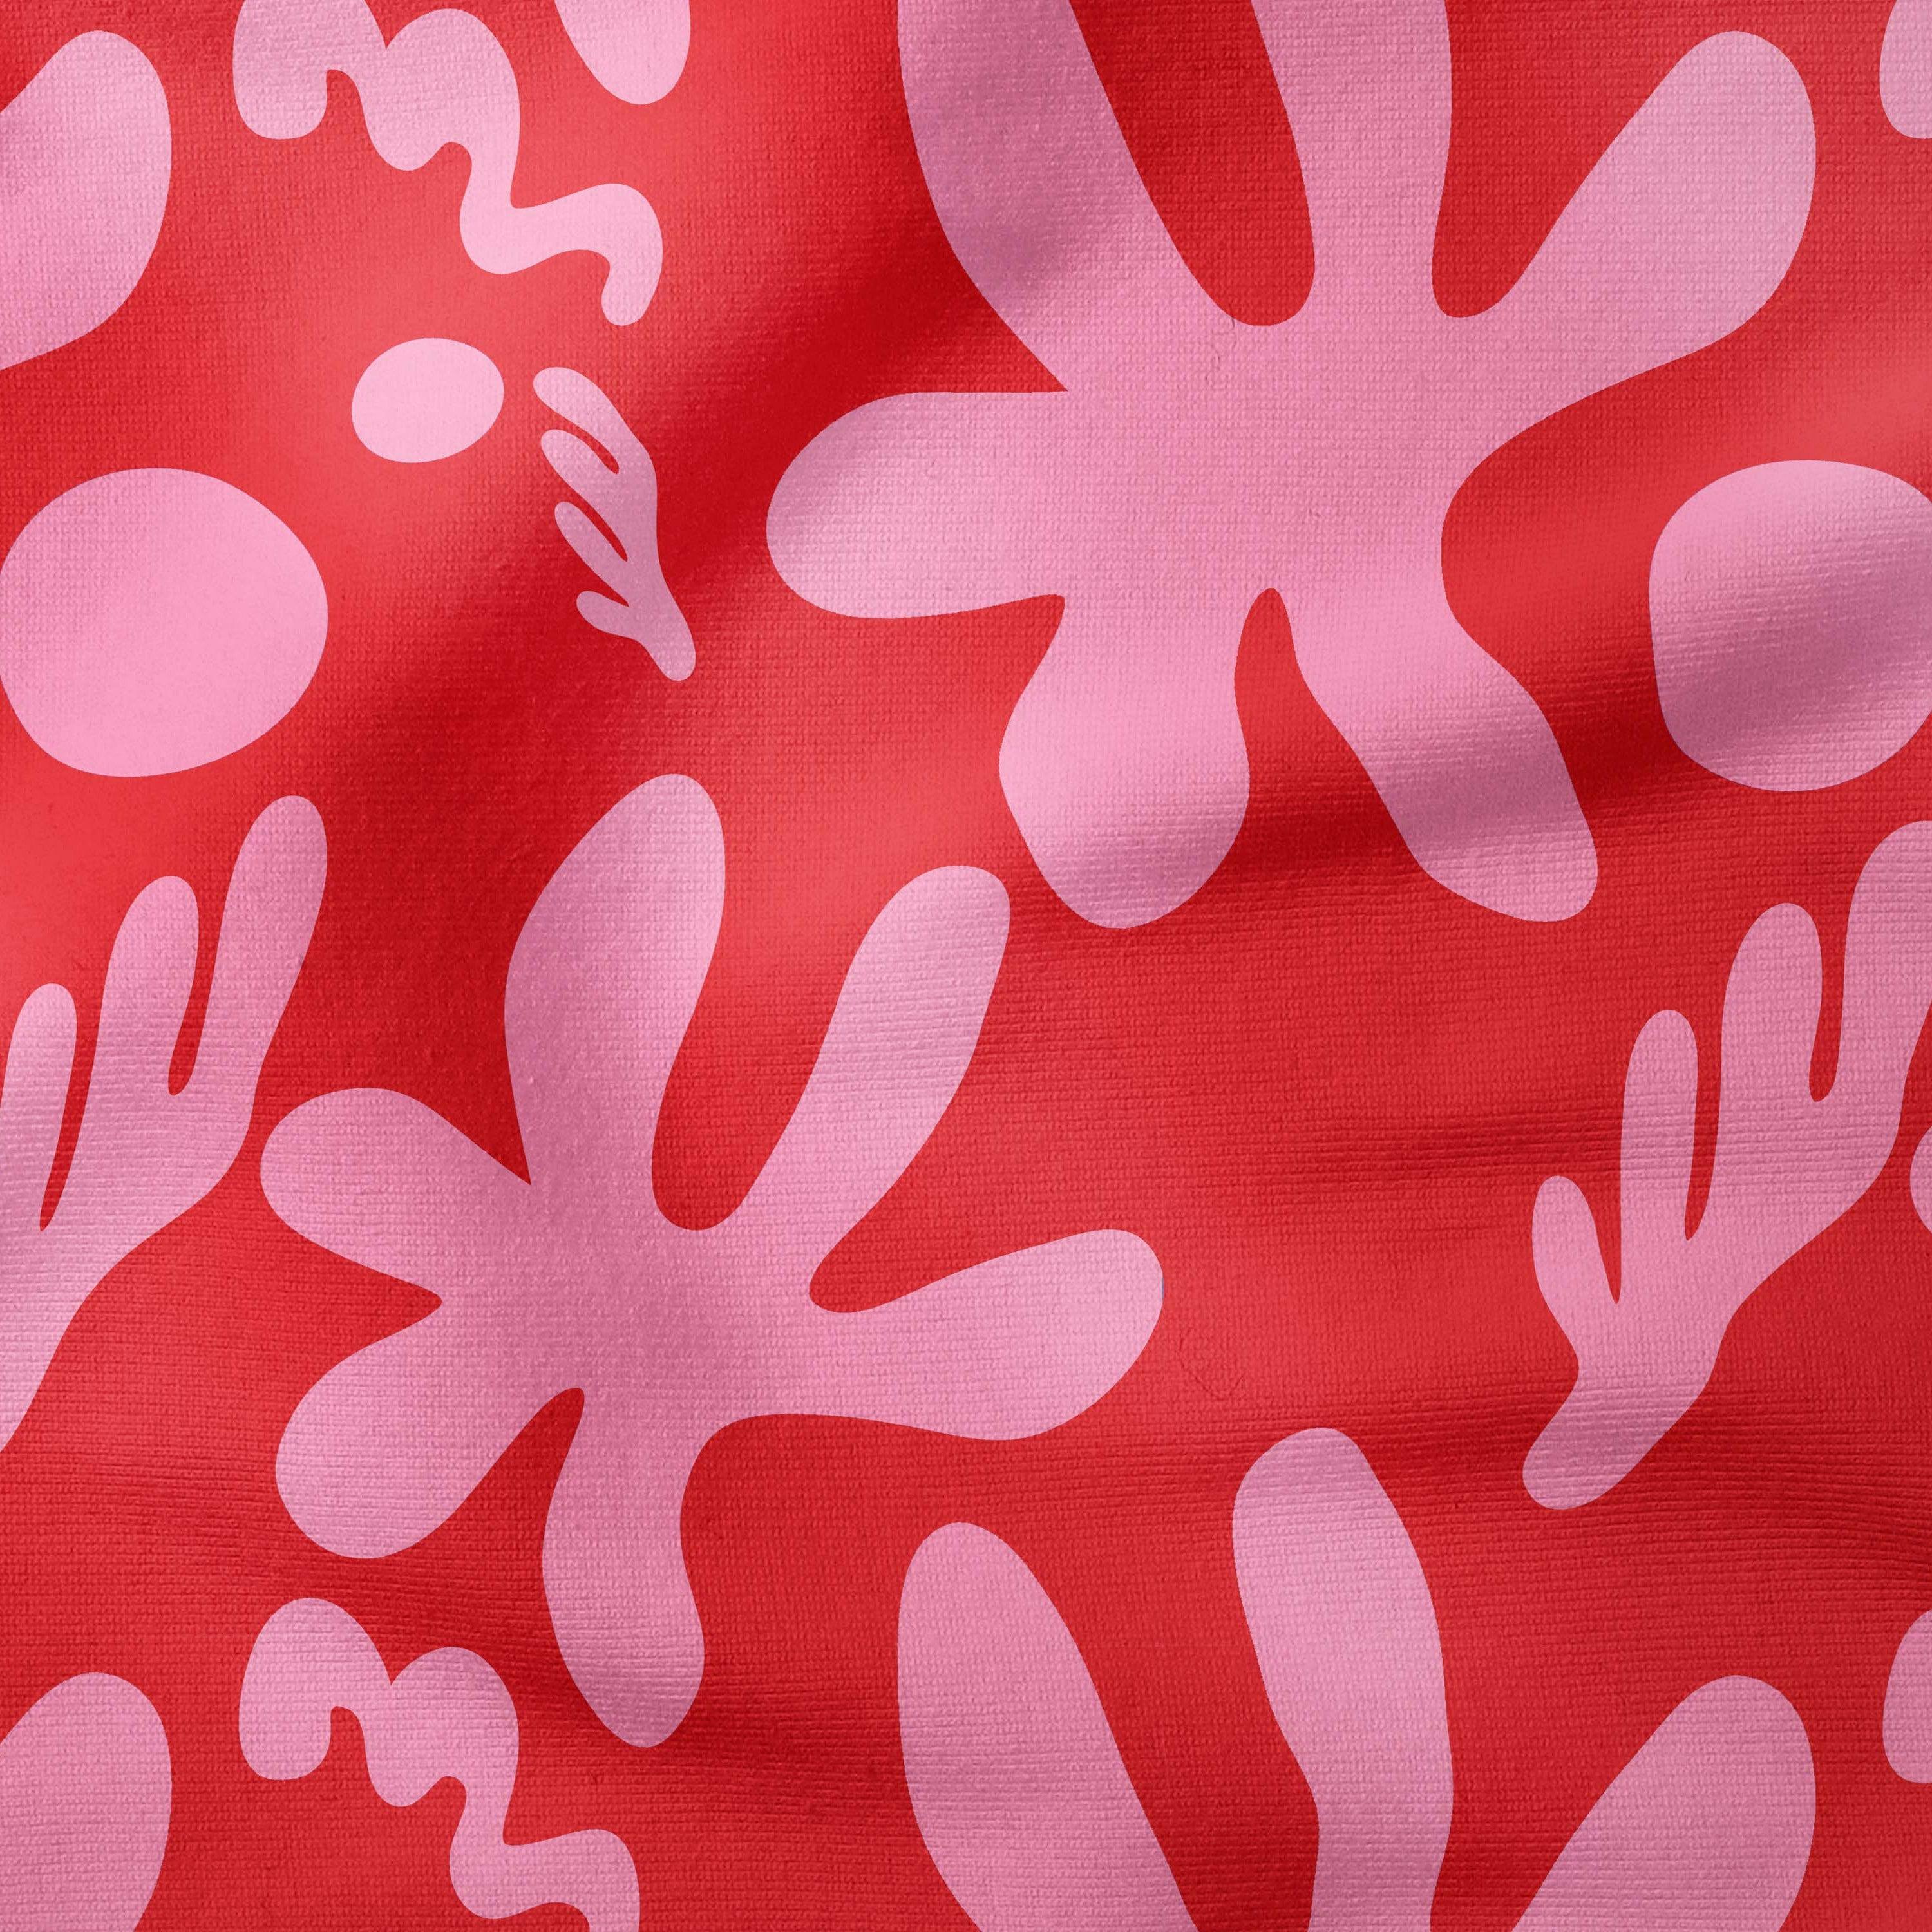 Abstract Flowers-Art Print Fabric-Melco Fabrics-Pink on Red-Cotton Poplin (110gsm)-Online-Fabric-Store-Australia